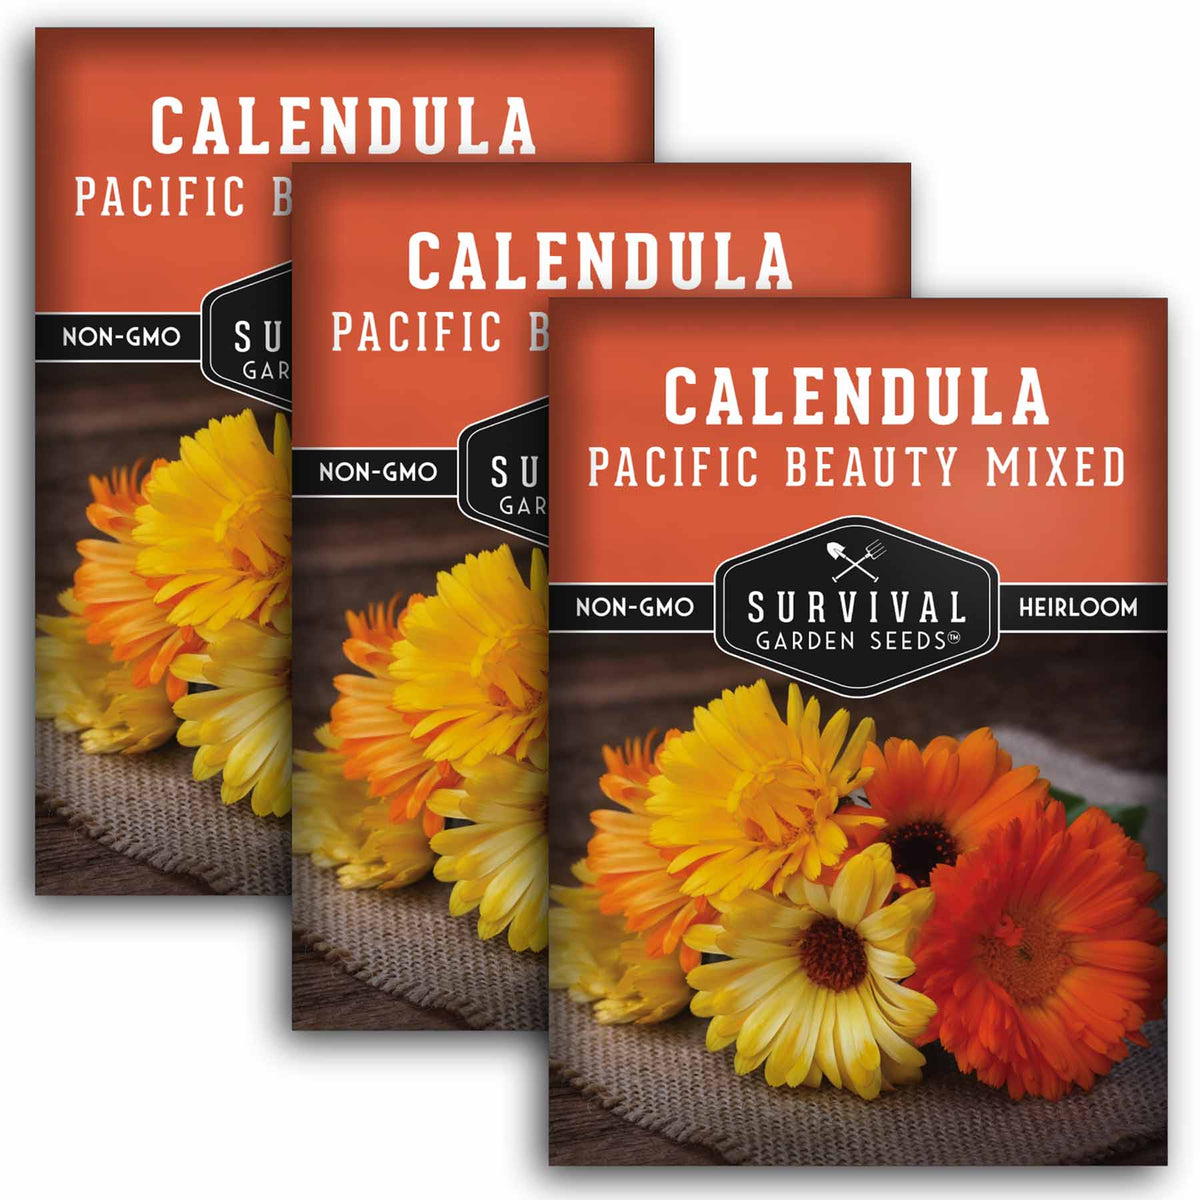 3 packets of Pacific Beauty Calendula seeds